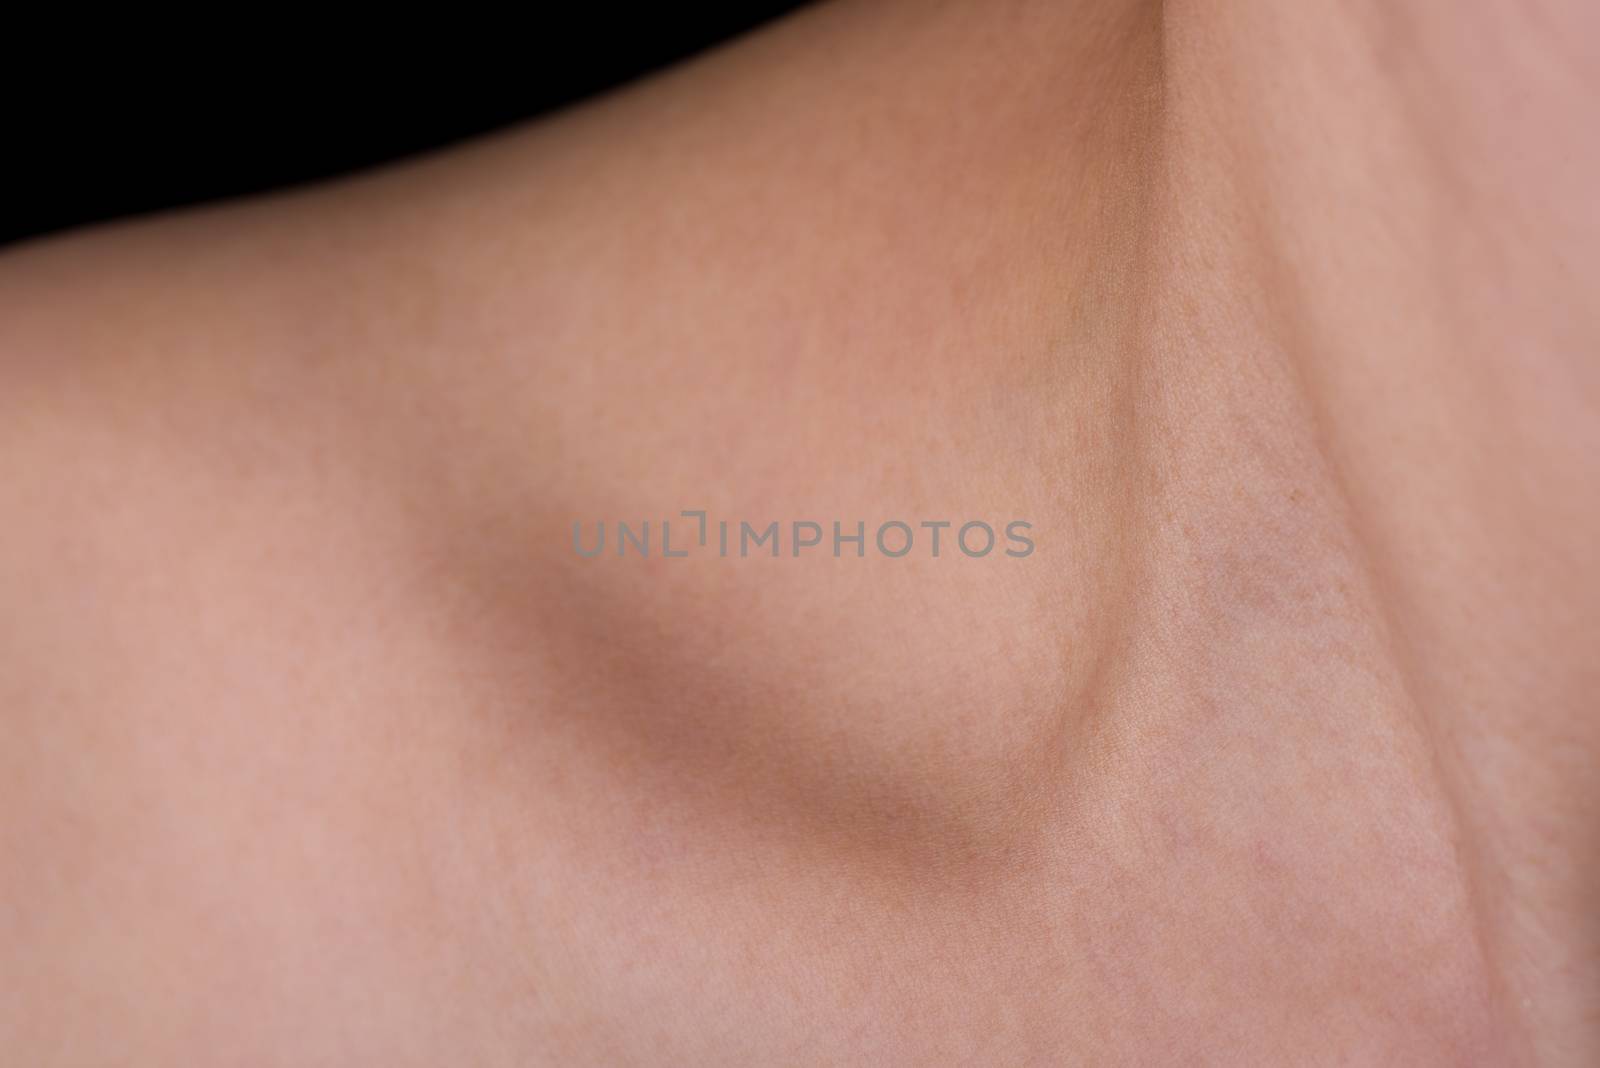 An abstract shot of a woman's neck, collarbone and shoulder with a small amount of black background showing.